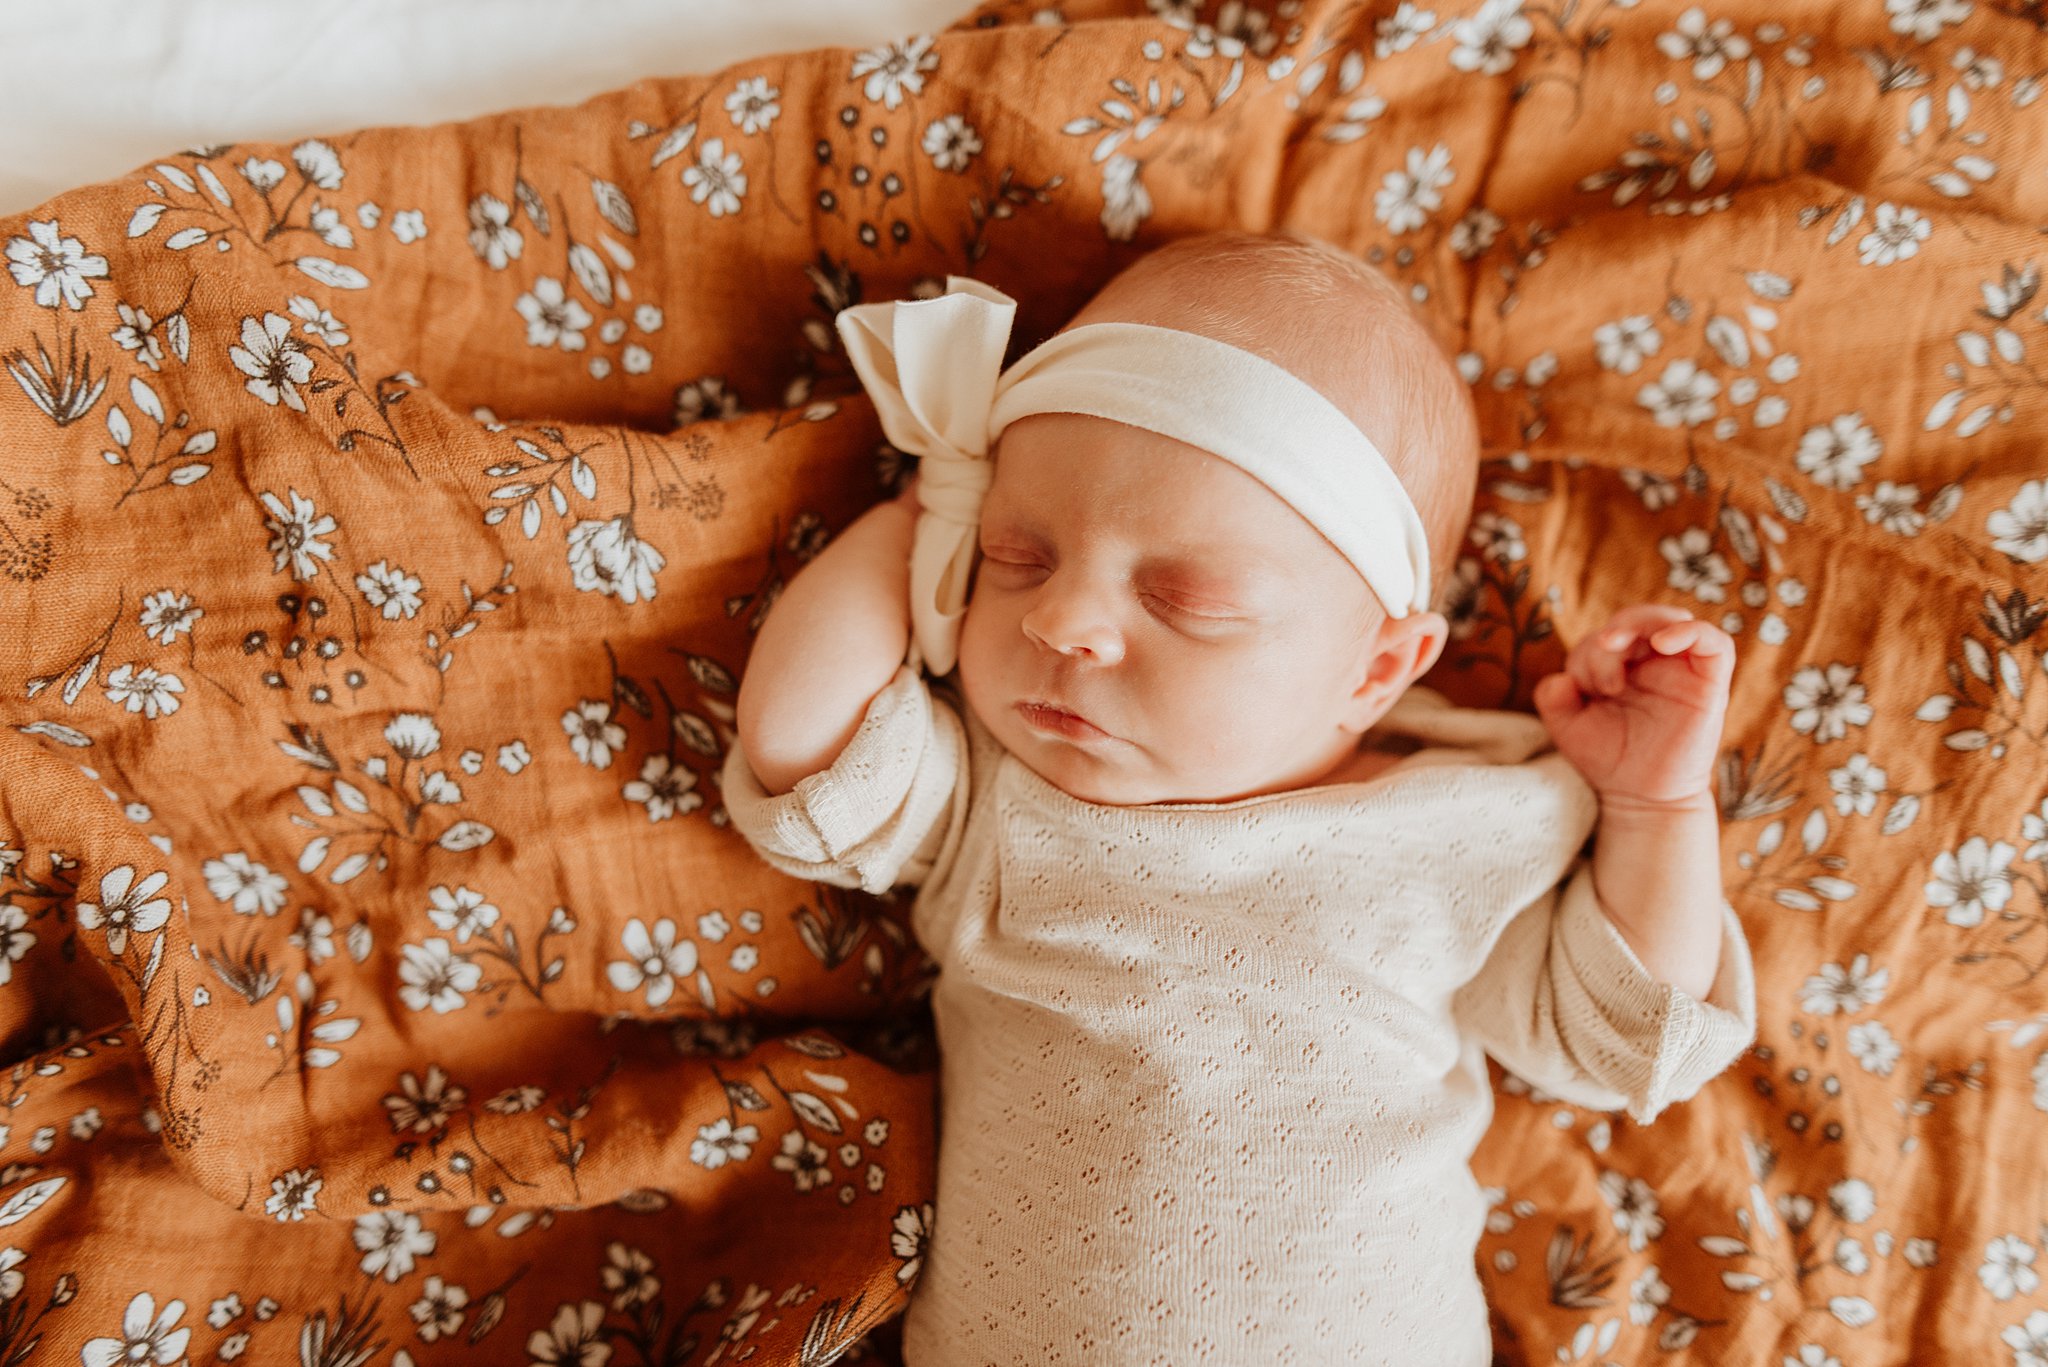 A newborn baby girl sleeps in mom's lap in a large bow headband on an orange floral dress thanks to vancouver diaper service